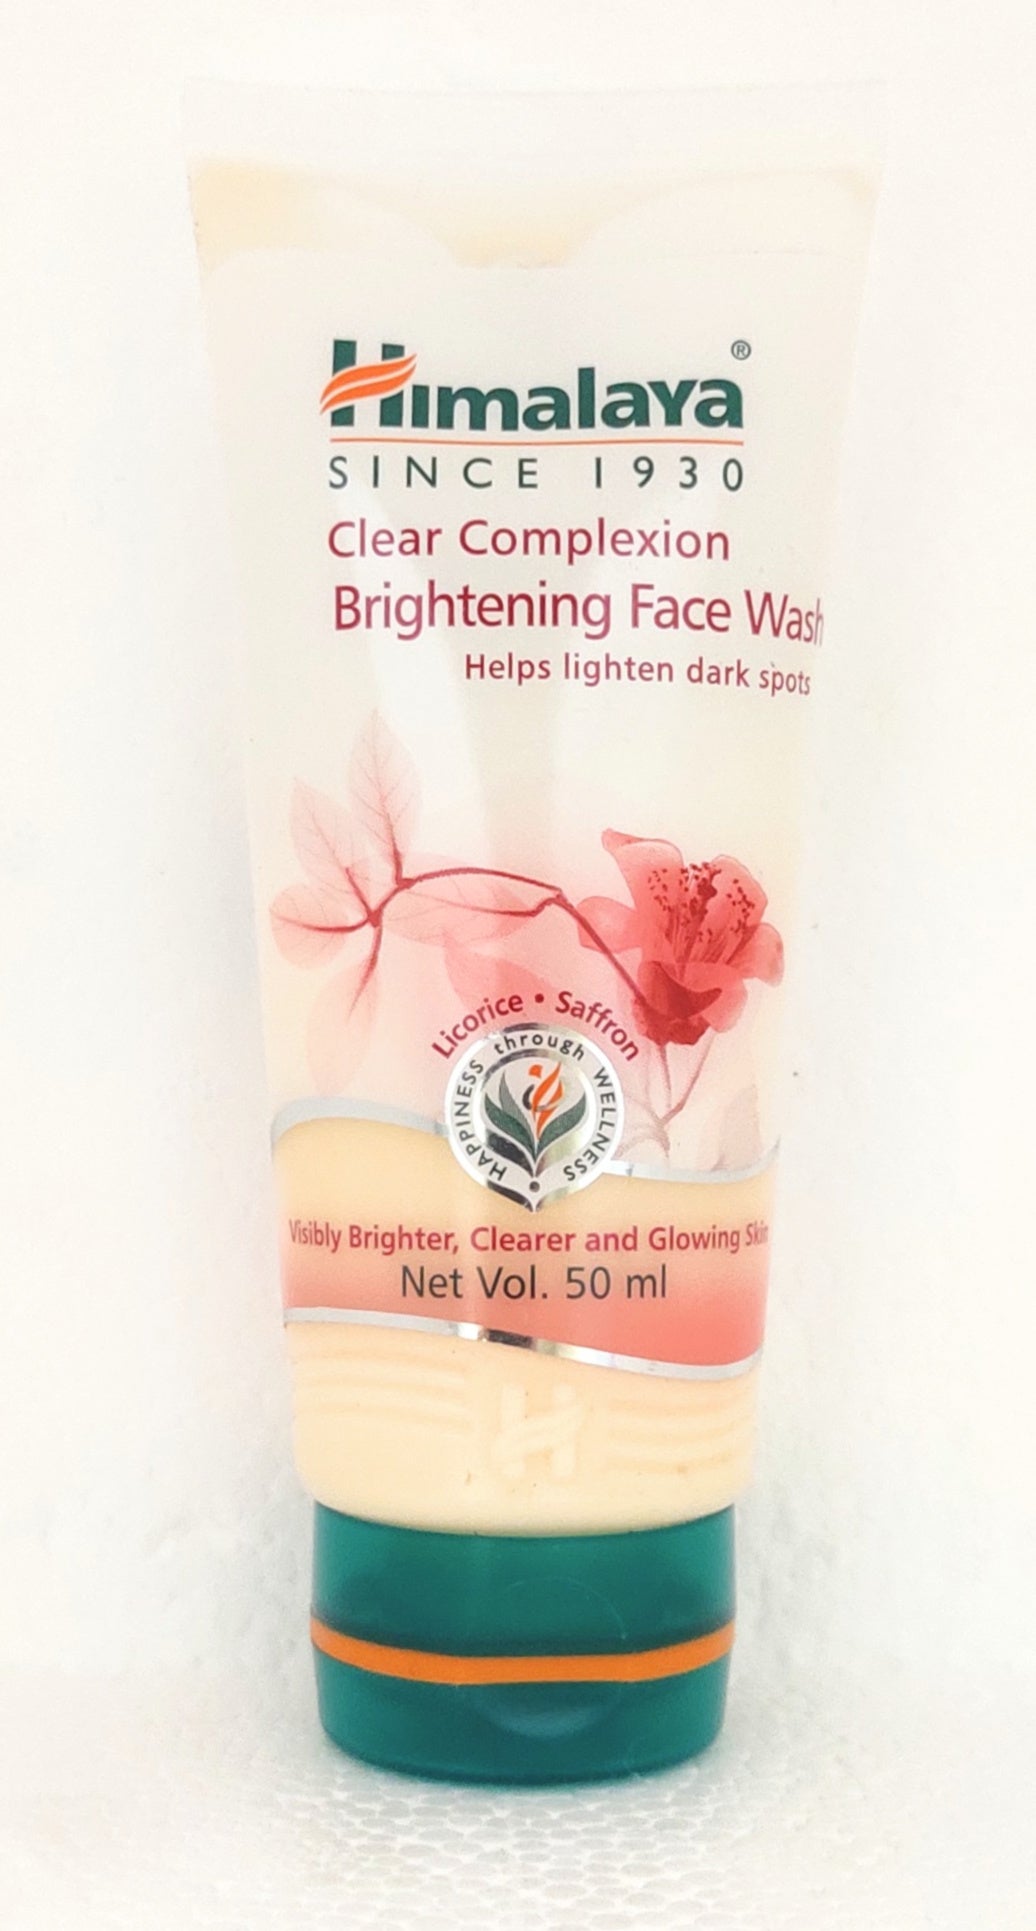 Shop Himalaya clear complexion brightening facewash 50ml at price 75.00 from Himalaya Online - Ayush Care